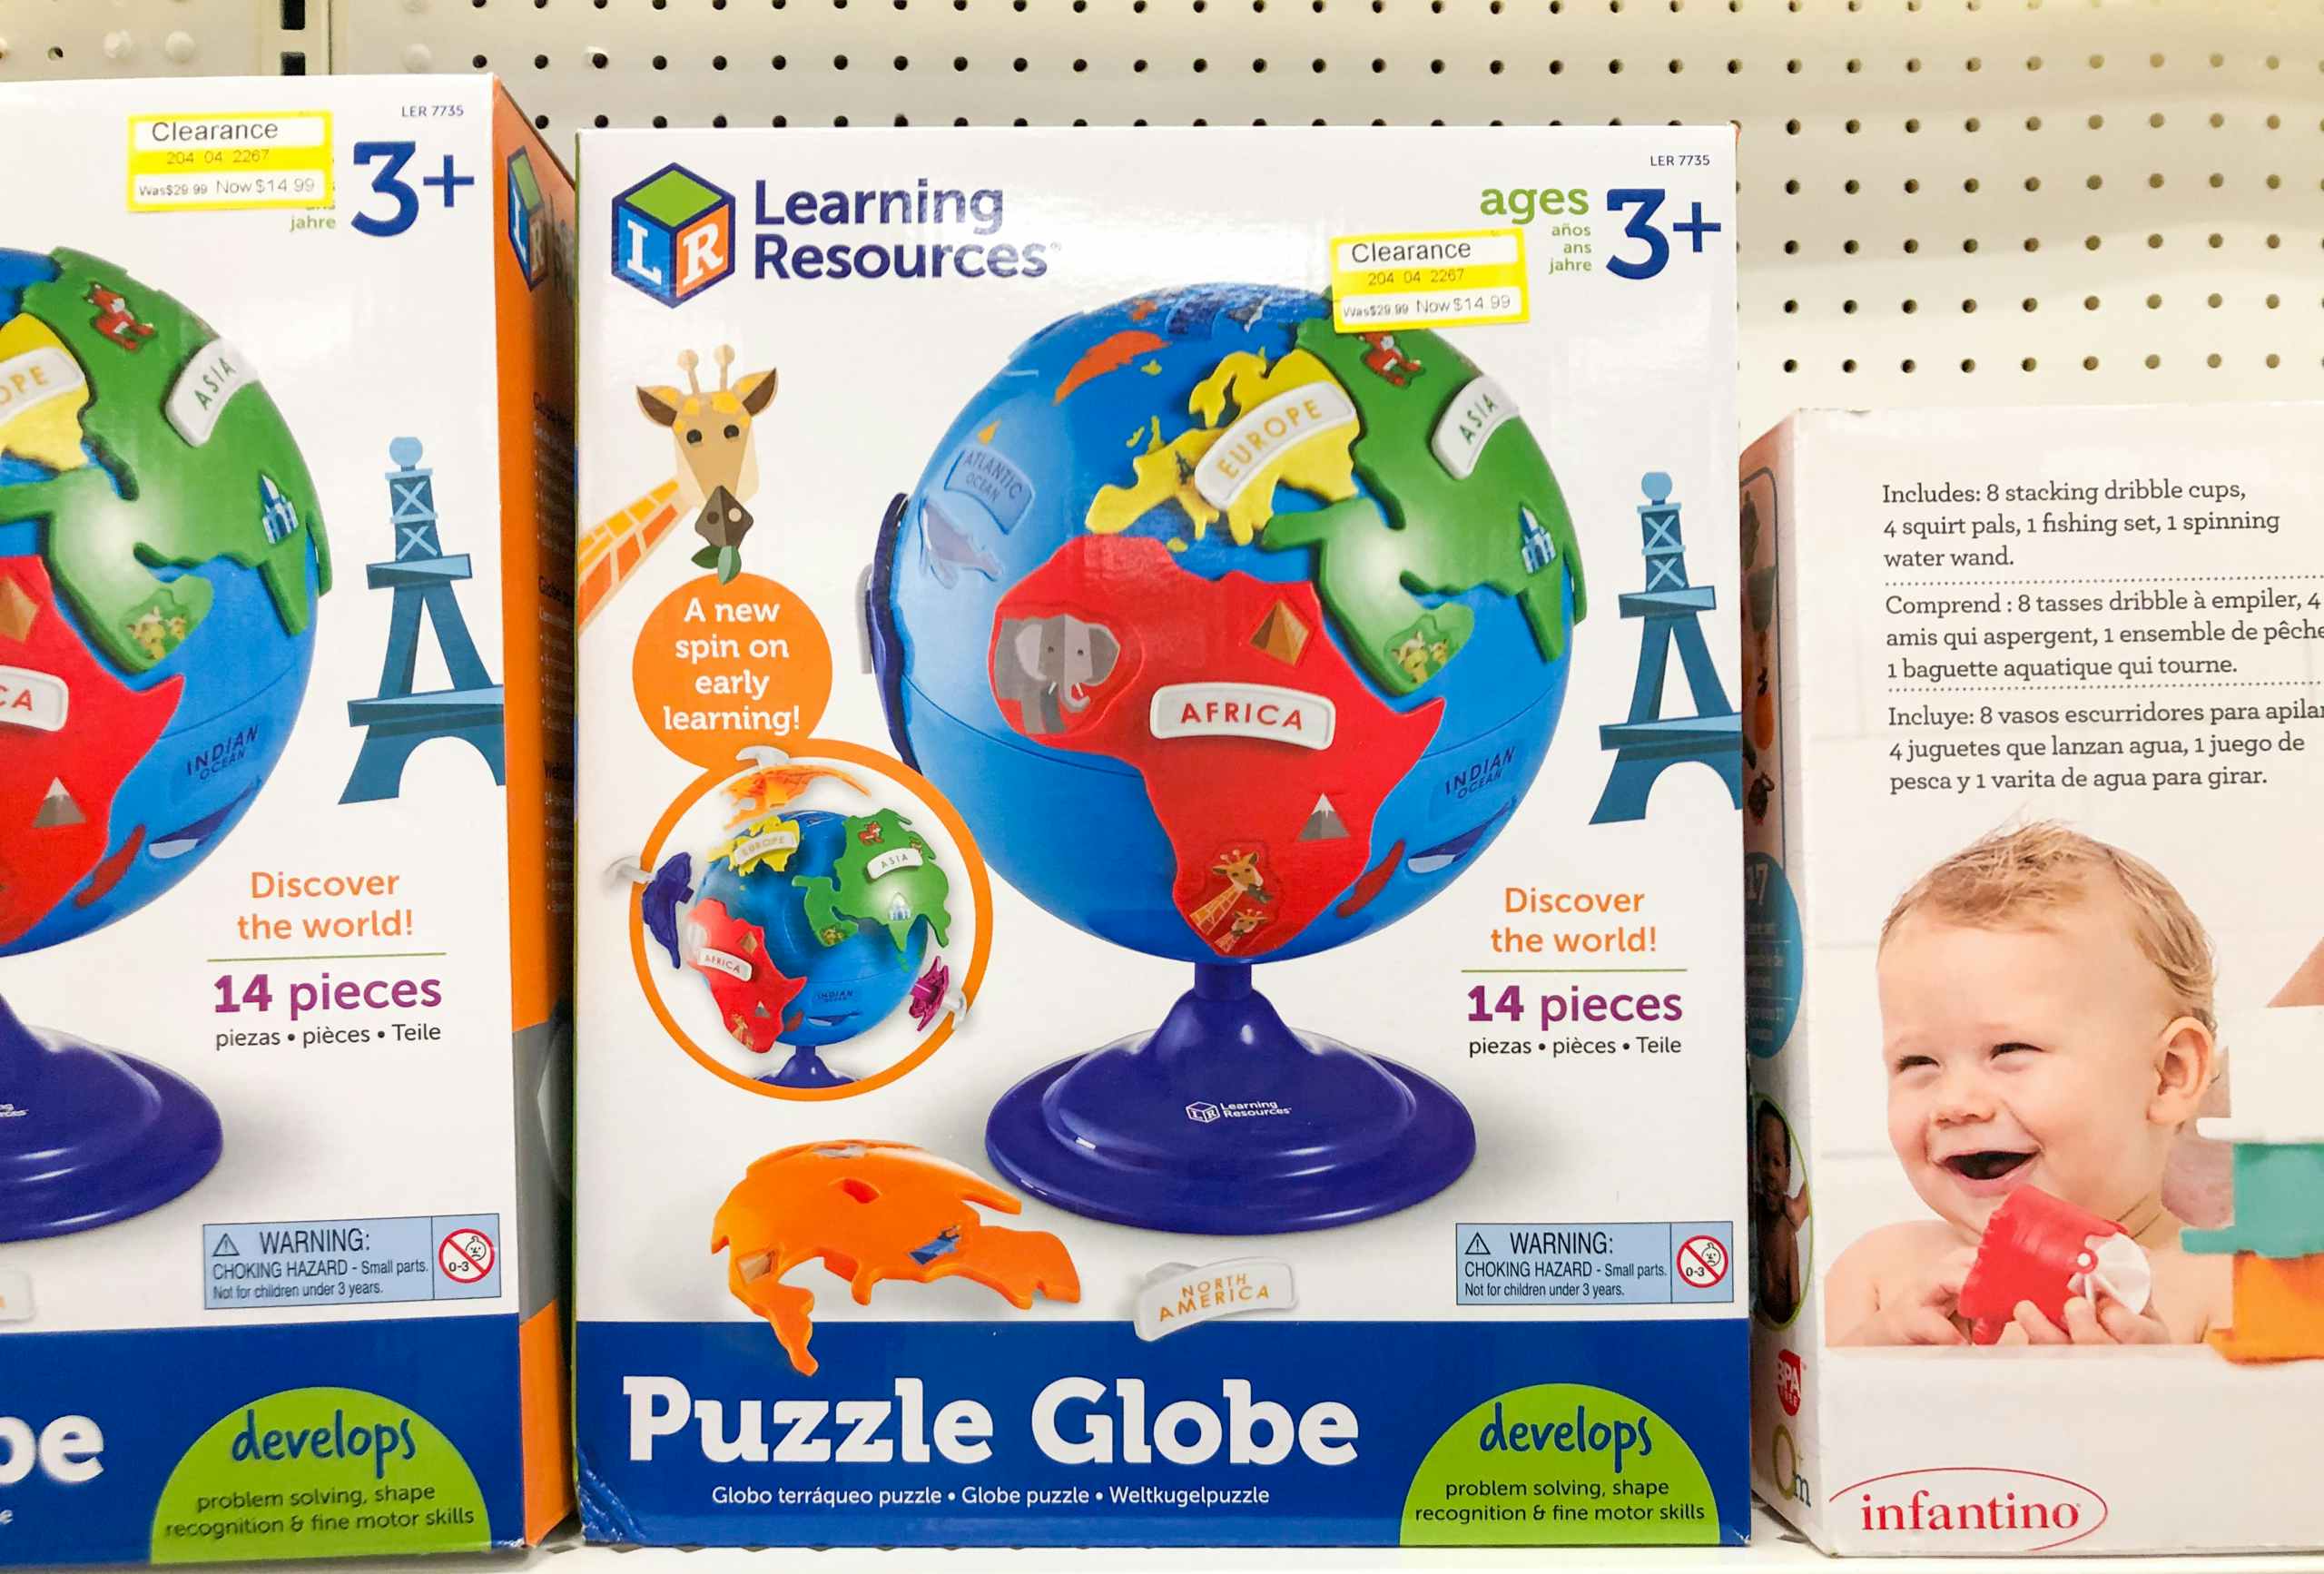 Puzzle globe on store shelf on clearance